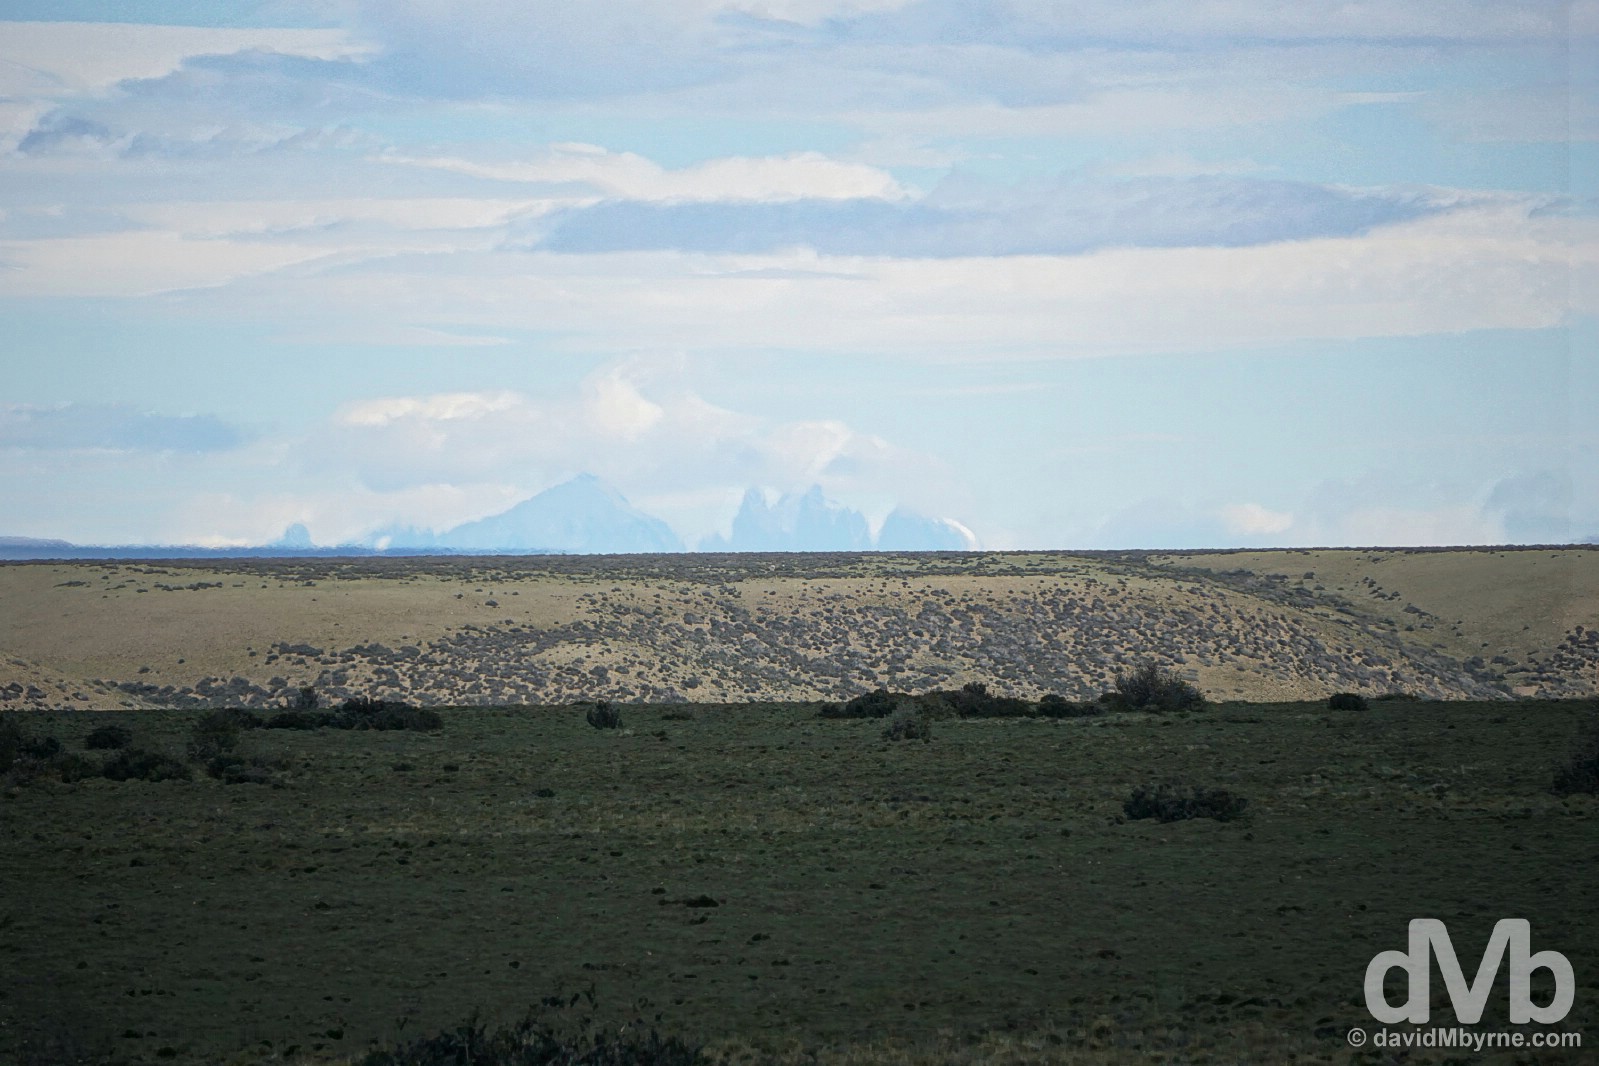 The distant peaks of Torres del Paine in Chile as seen from Ruta 5 in southern Patagonia, Argentina. November 1, 2015.